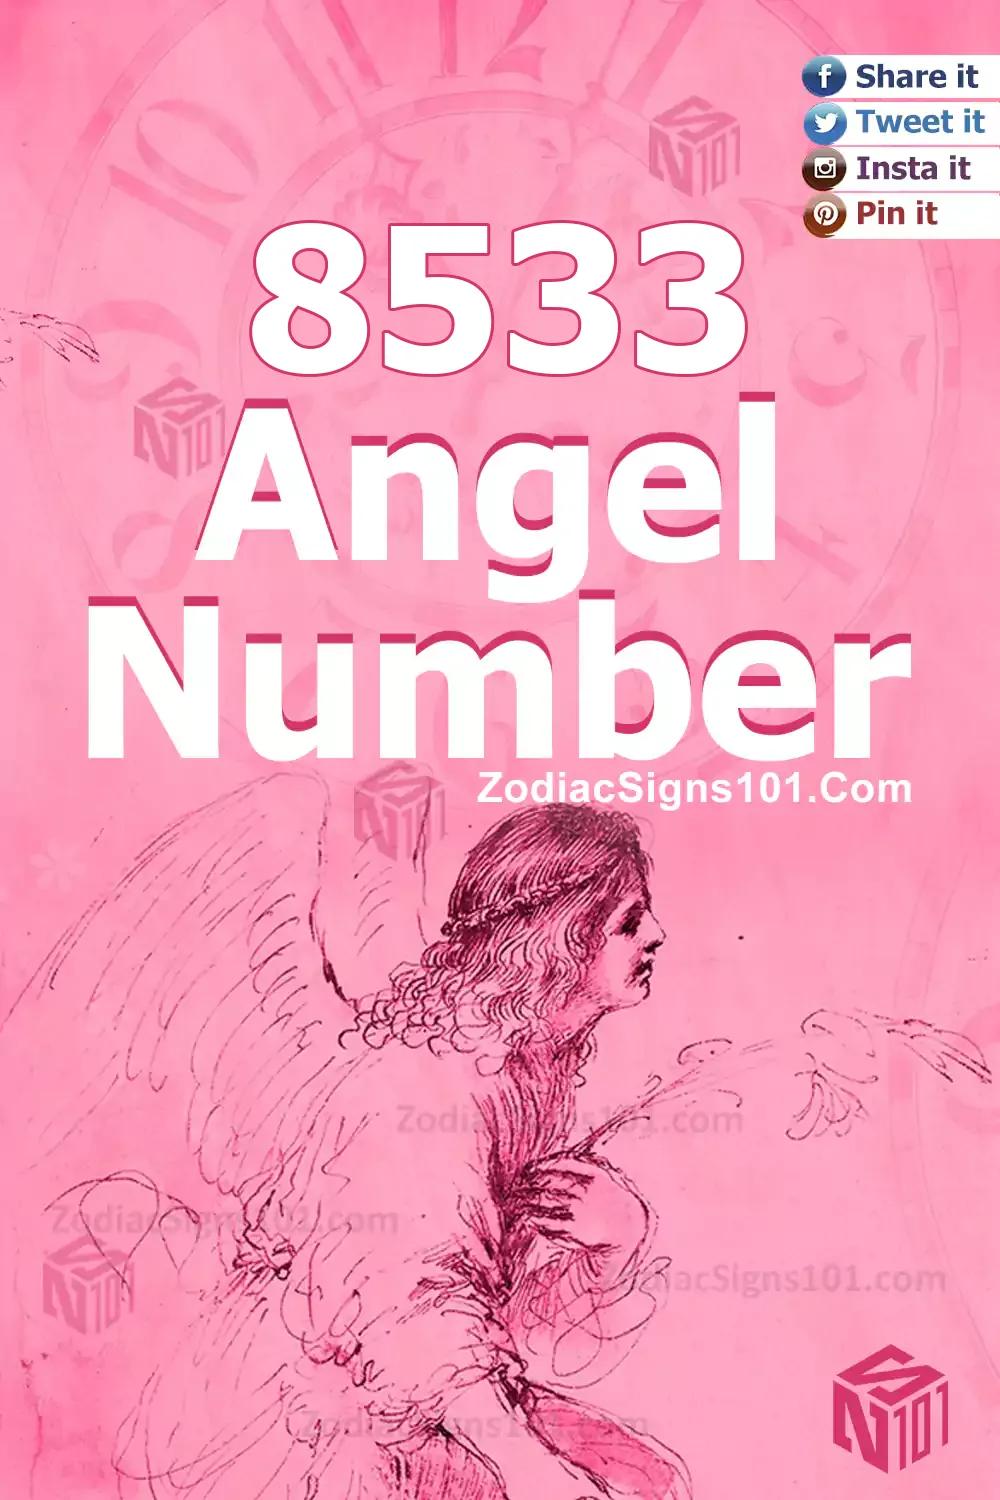 8533 Angel Number Meaning